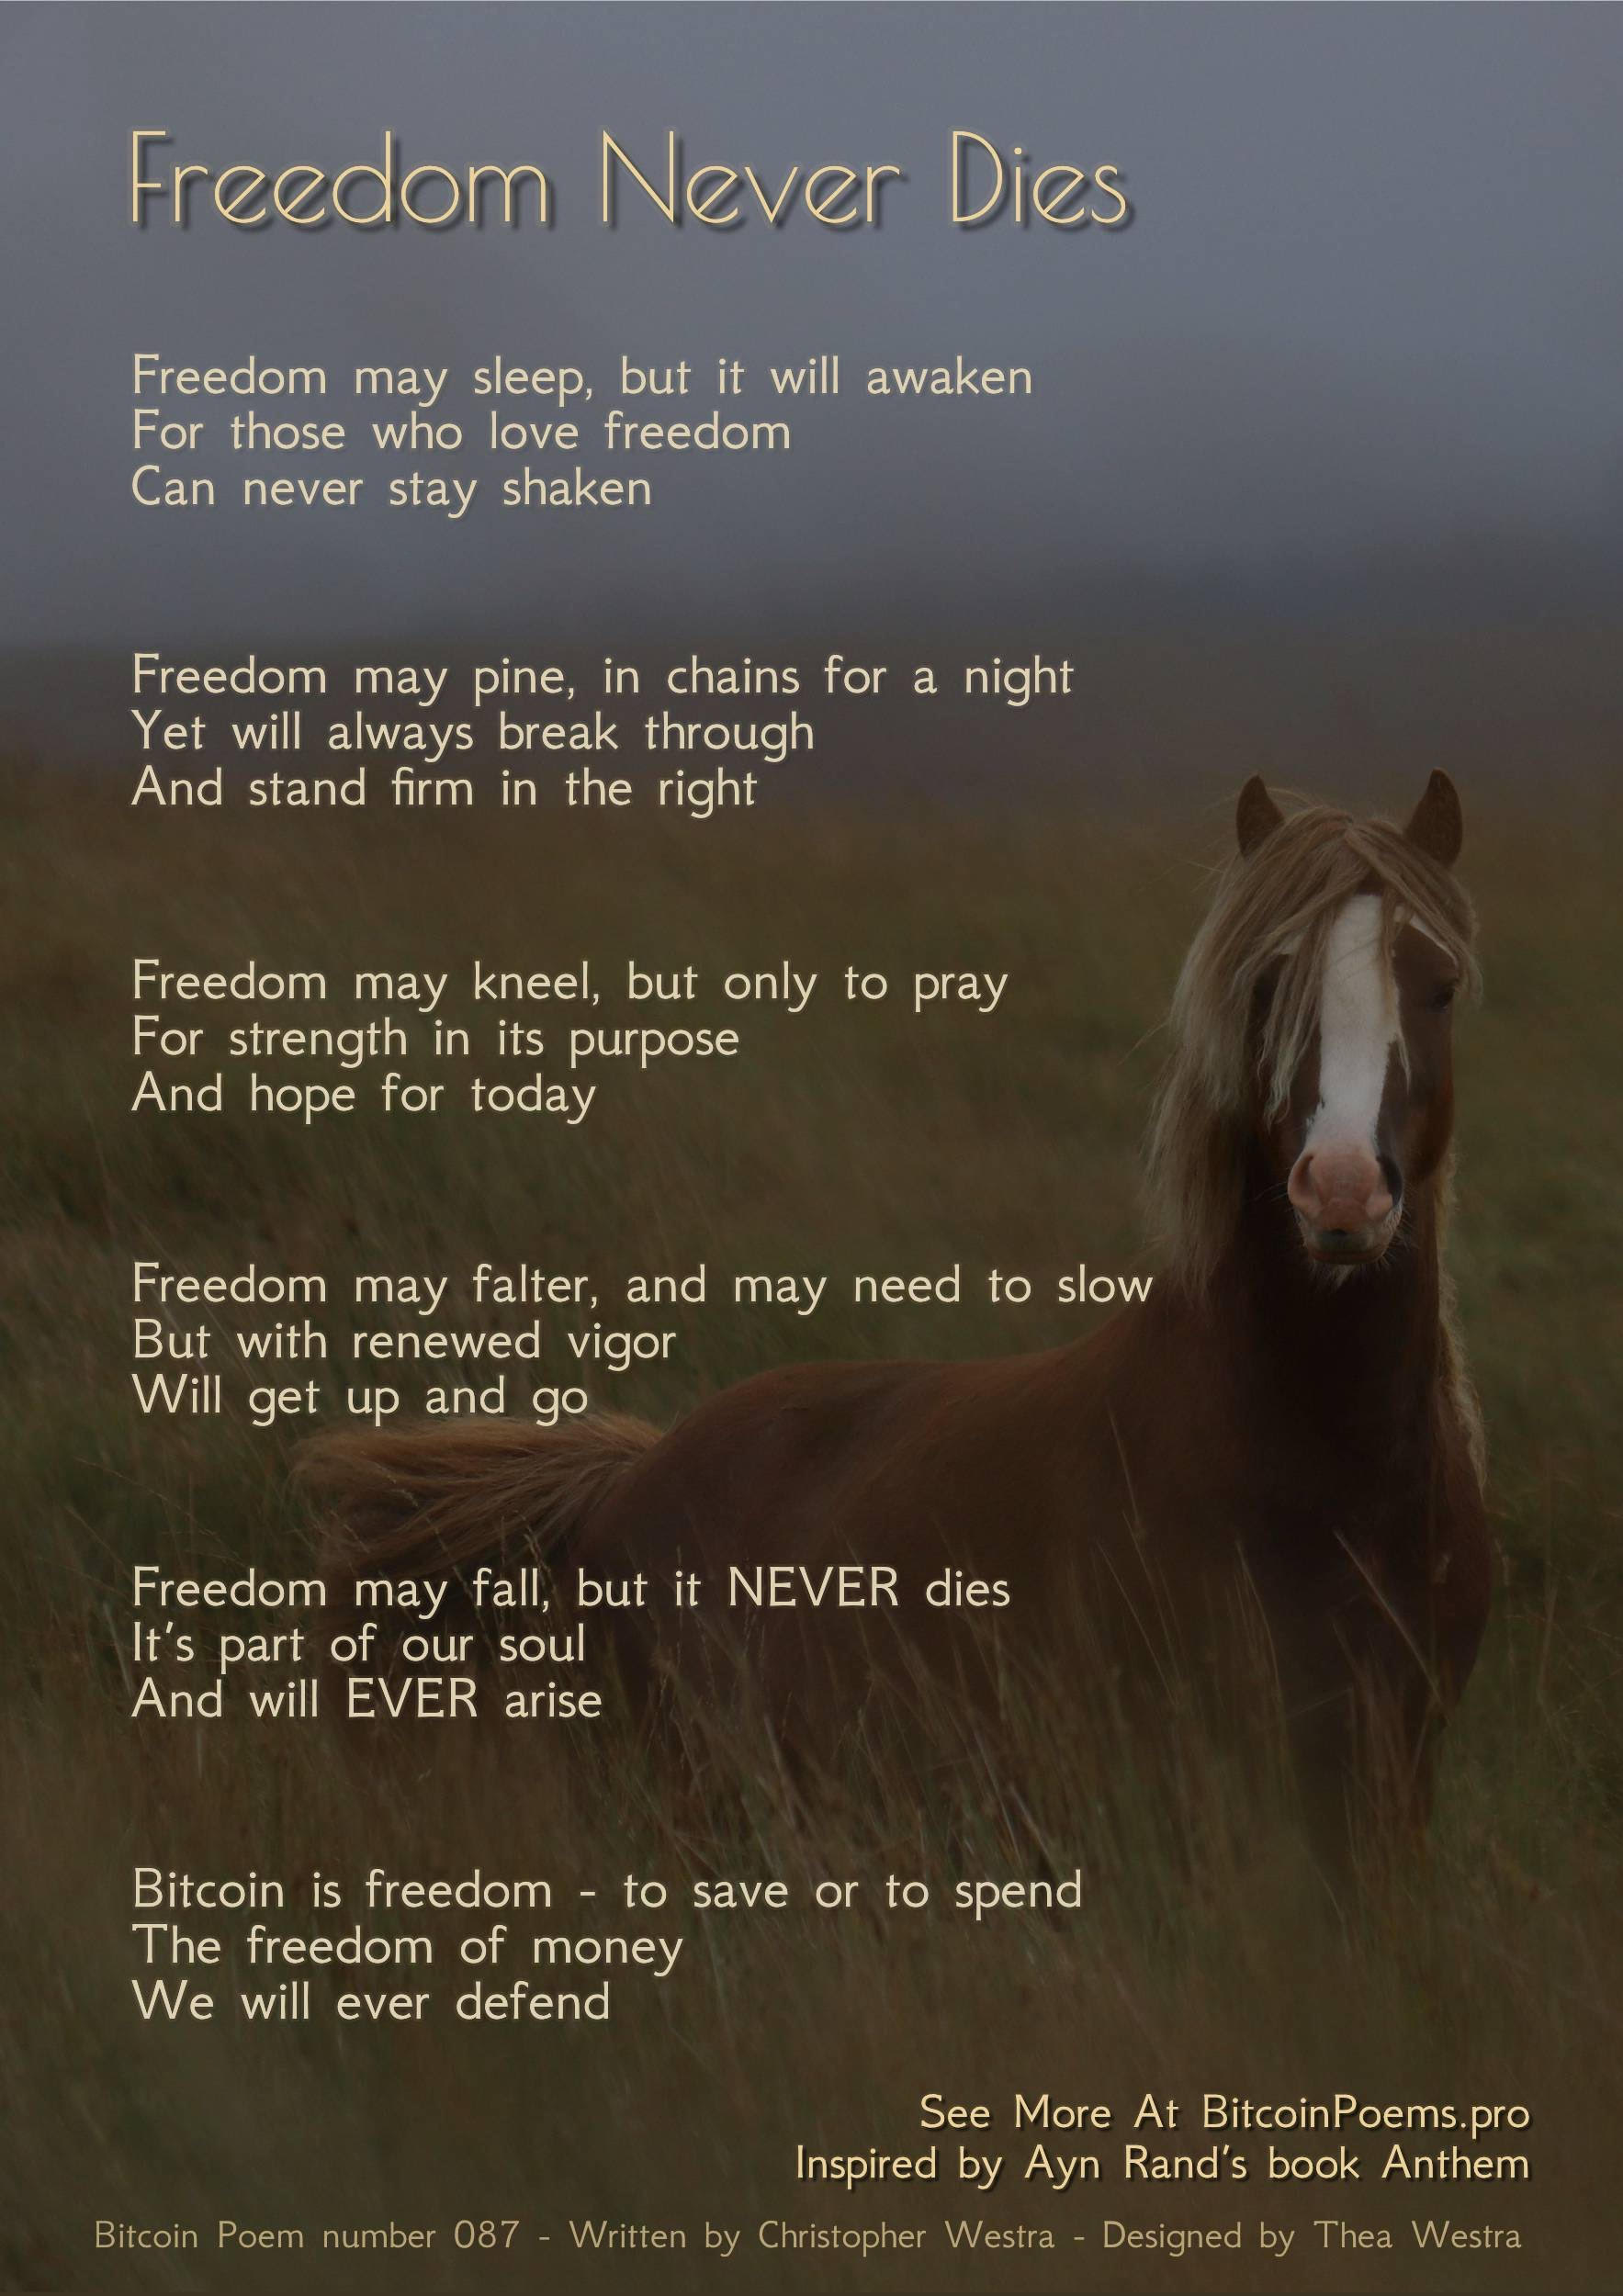 Freedom Never Dies - Bitcoin Poem 087 by Christopher Westra